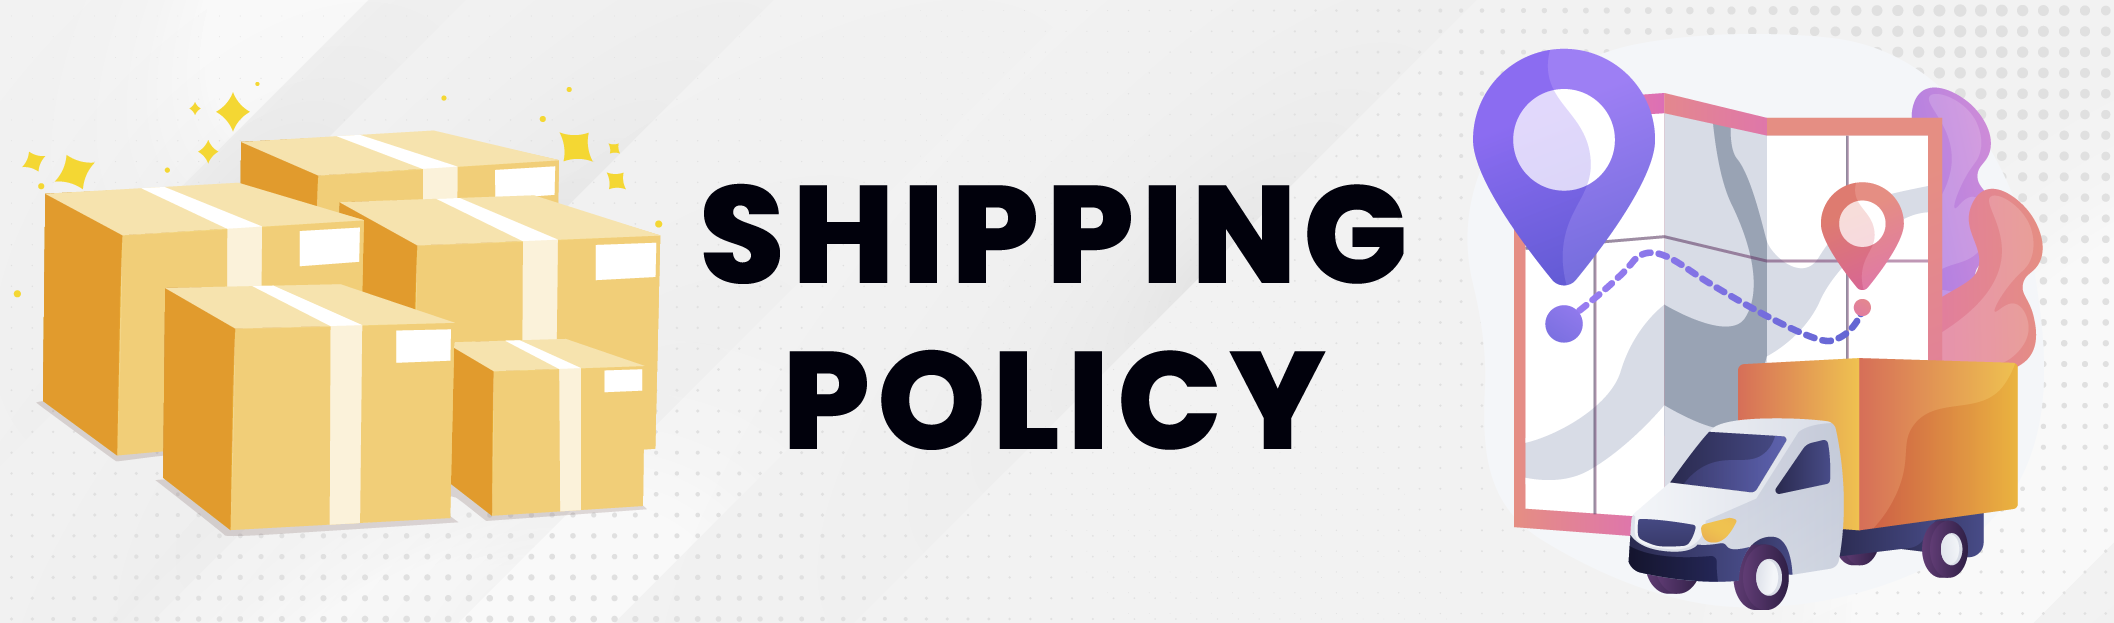 shipping policy banner imagery